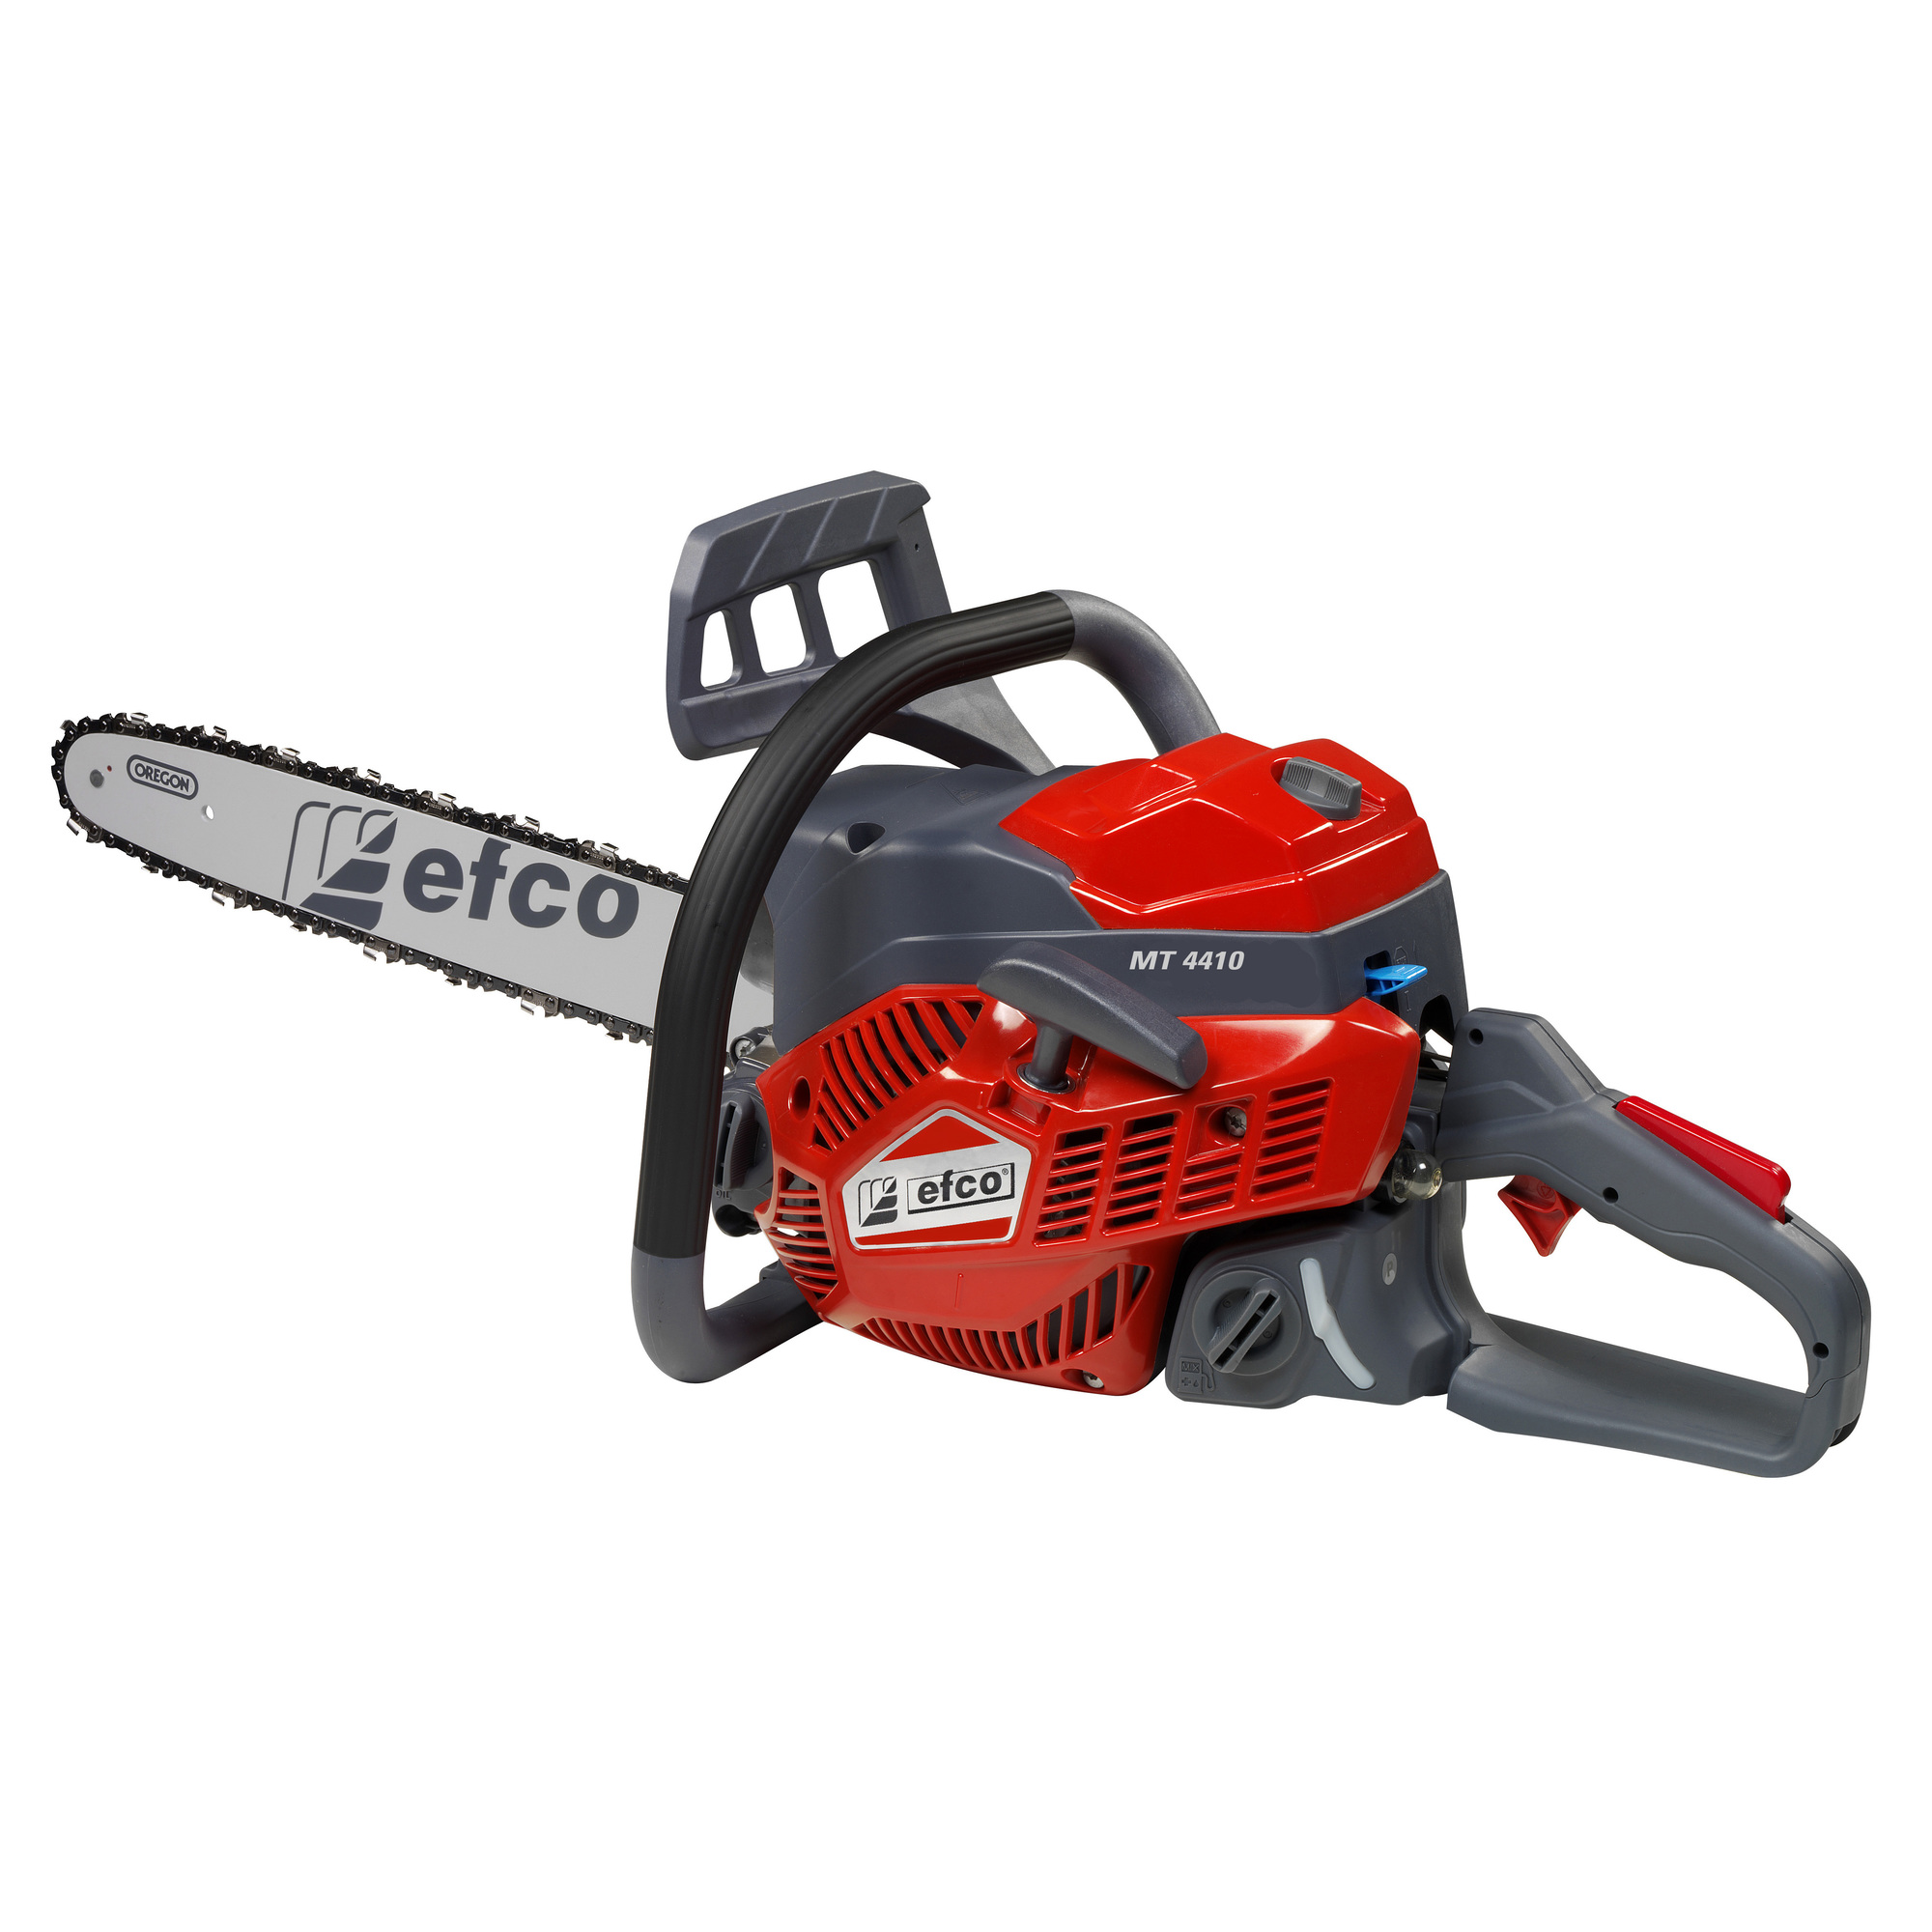 Efco, MT-Series Gas Chainsaw, Bar Length 18 in, Engine Displacement 42.9 cc, Model MT4410-18